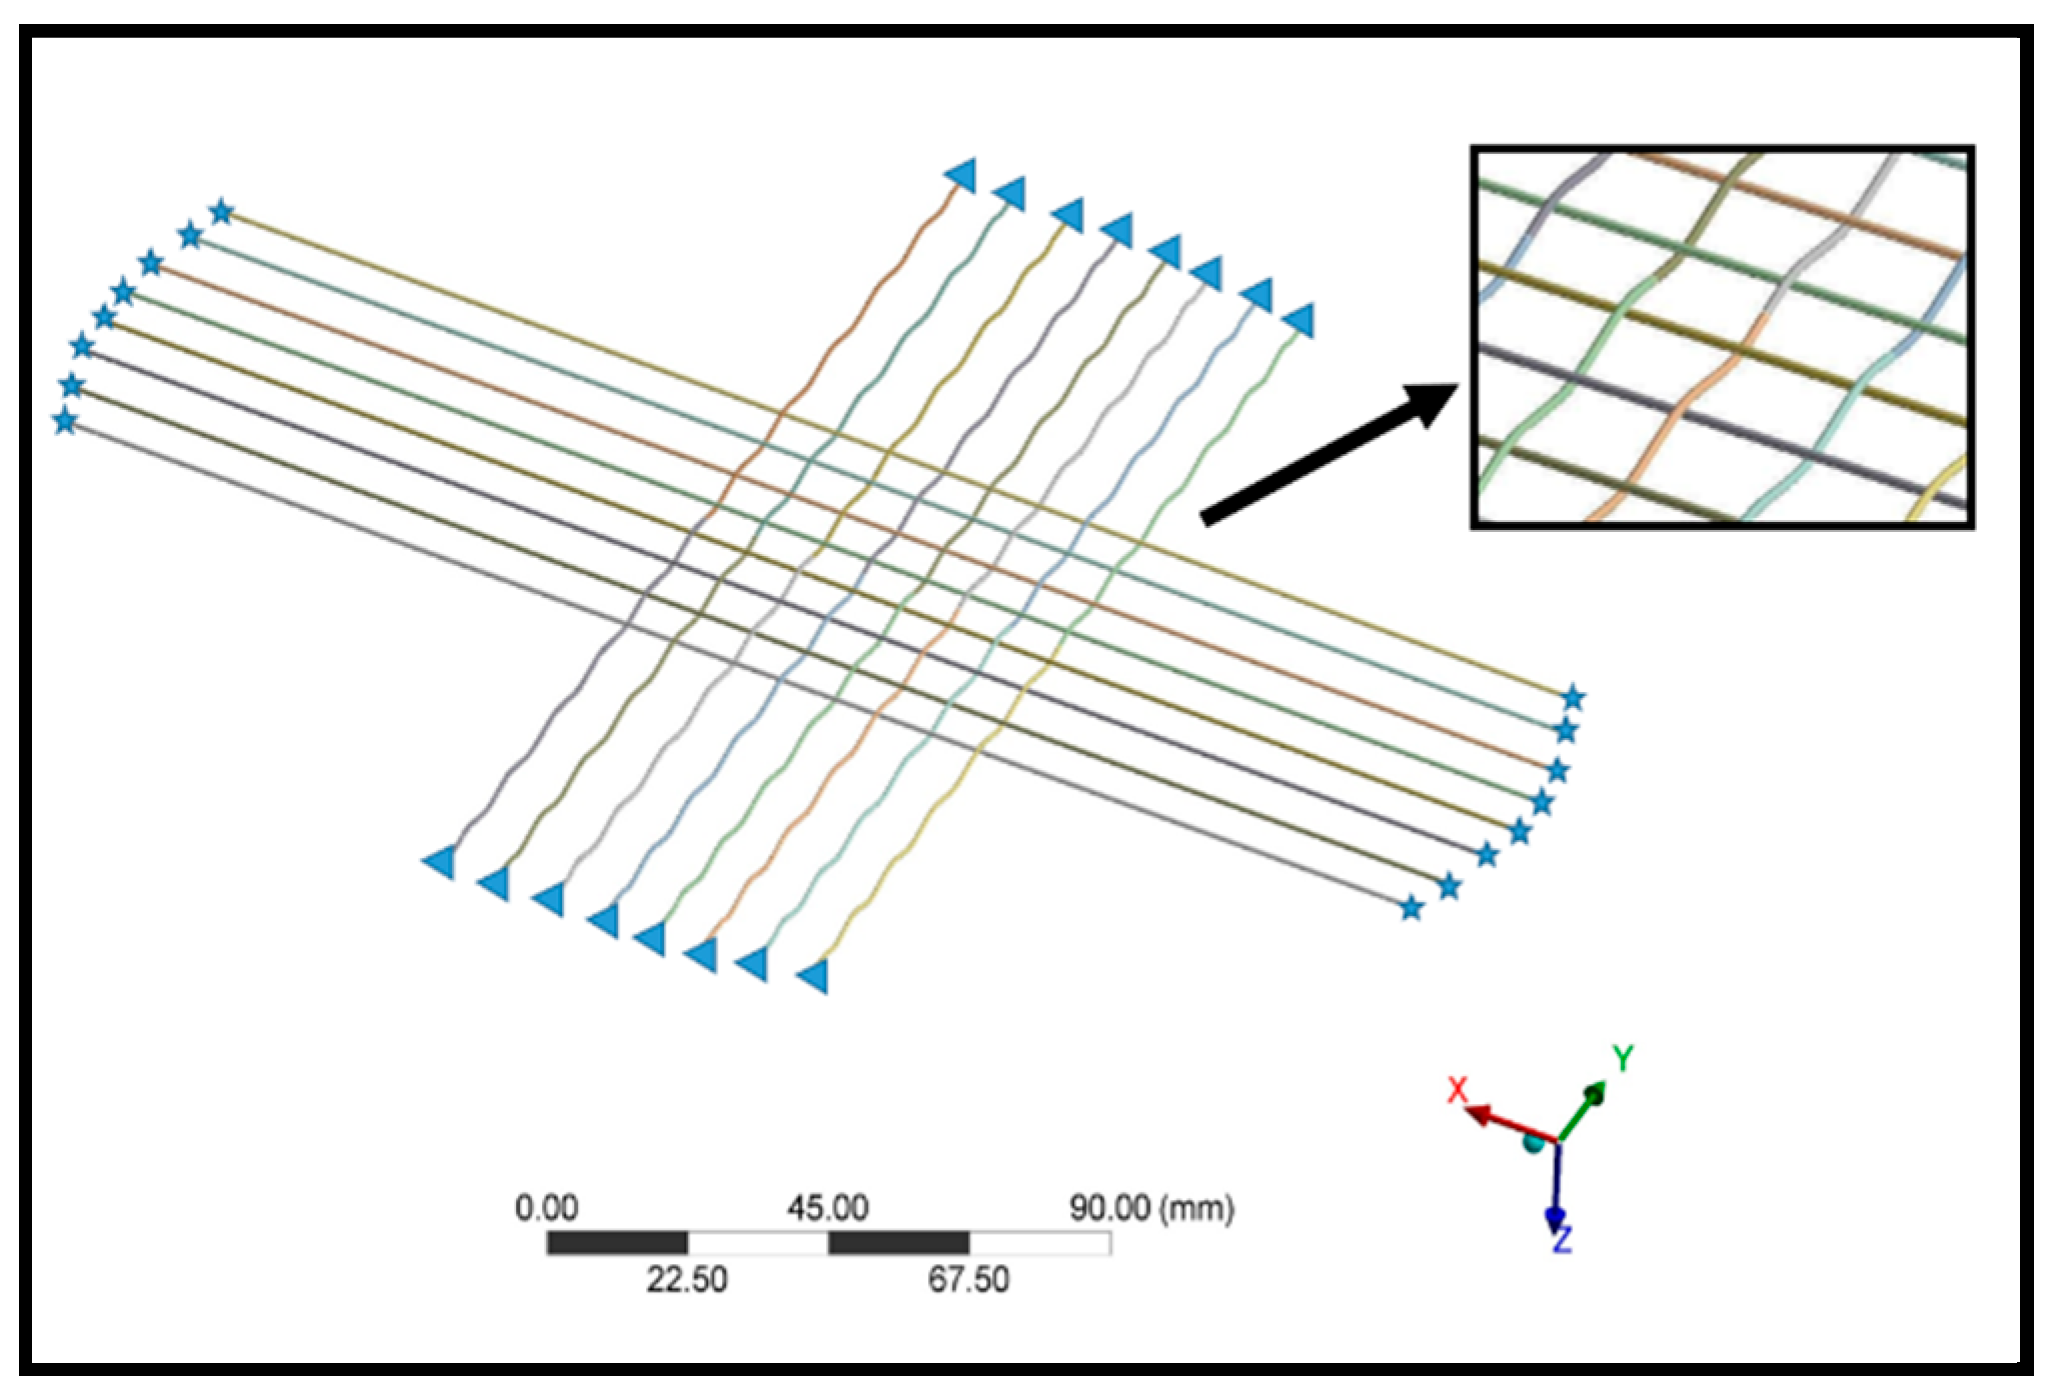 Proceedings | Free Full-Text | Impact Characteristics of a Badminton Racket  with Realistic Finite Element Modeling